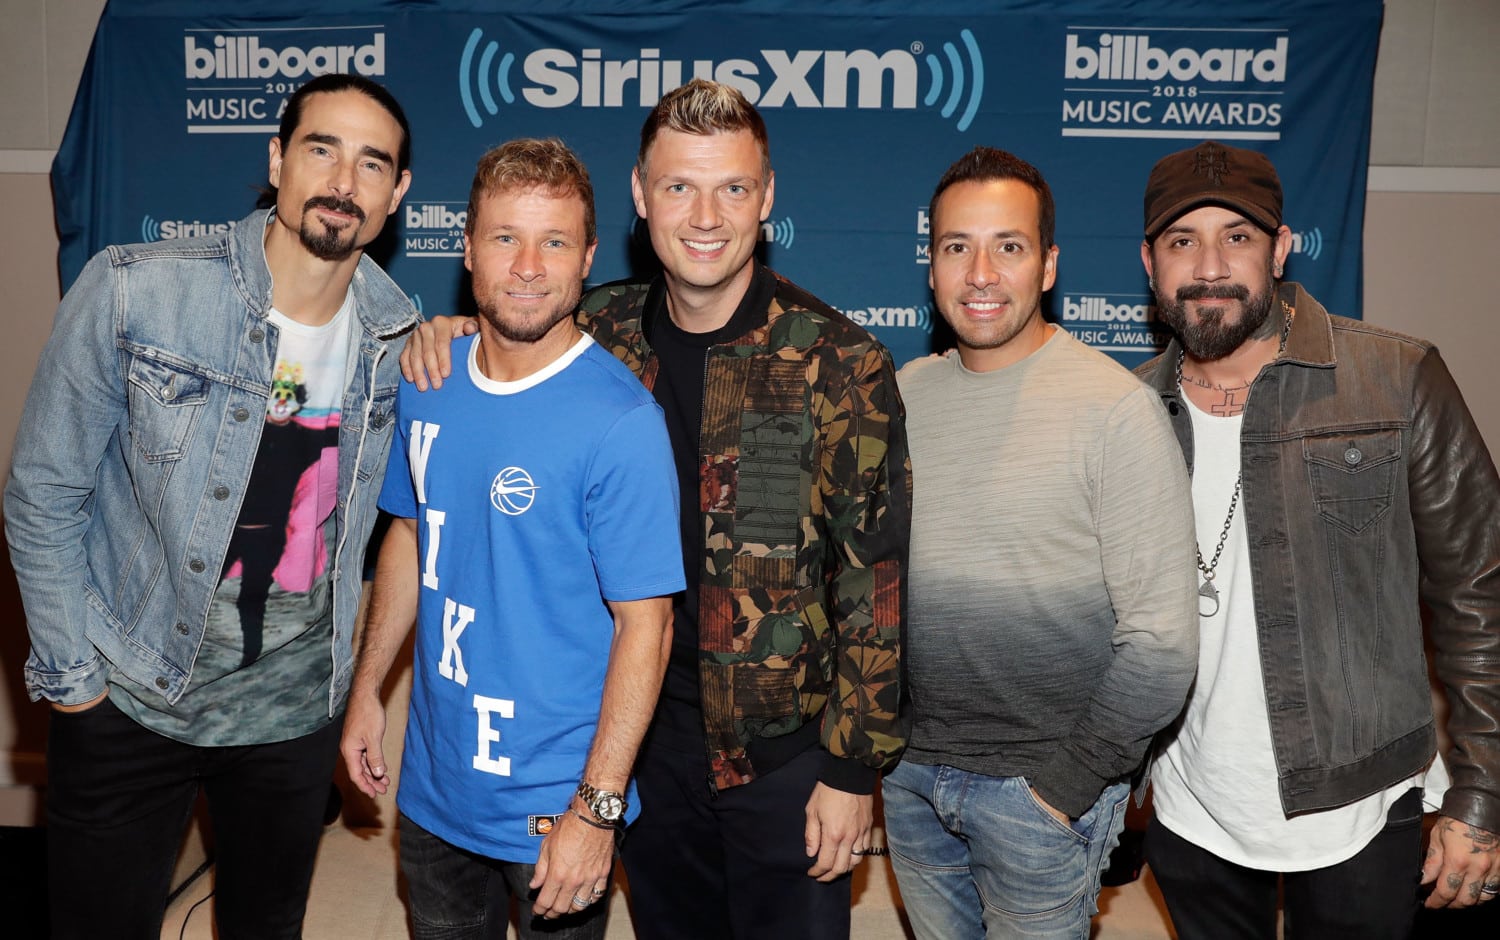 SiriusXM's 'The Morning Mash Up' Broadcasts Backstage Leading Up To The Billboard Music Awards